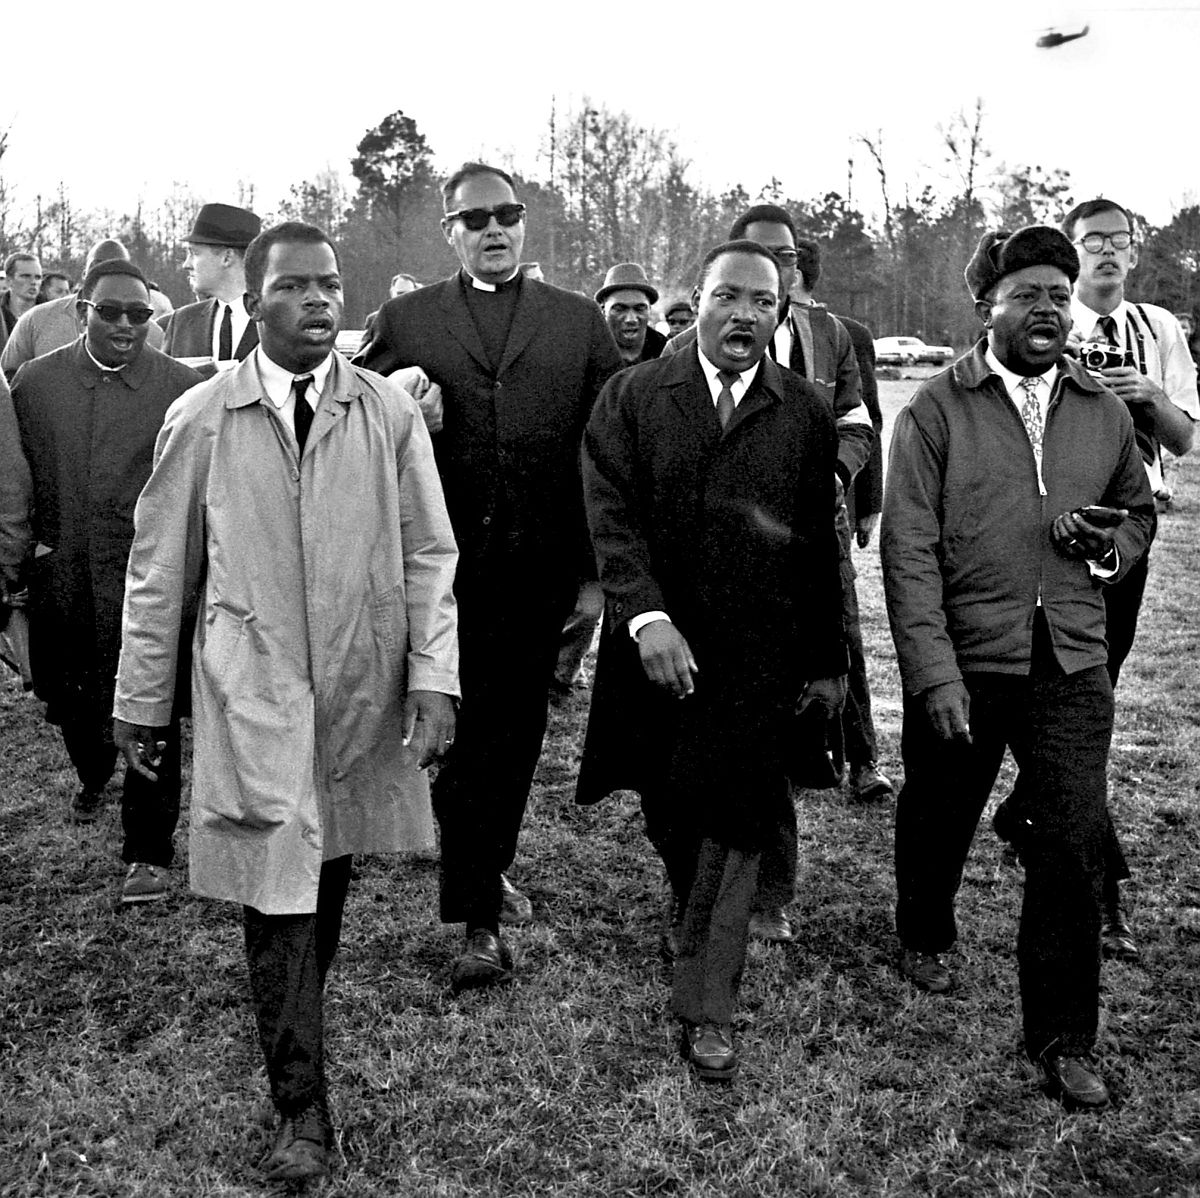 John Lewis, Dr. Martin Luther King, Jr., & Ralph Abernathy singing “We Shall Overcome” on the James Meredith March Against Fear, Mississippi, June 1966 © Harry Benson: Four Stories